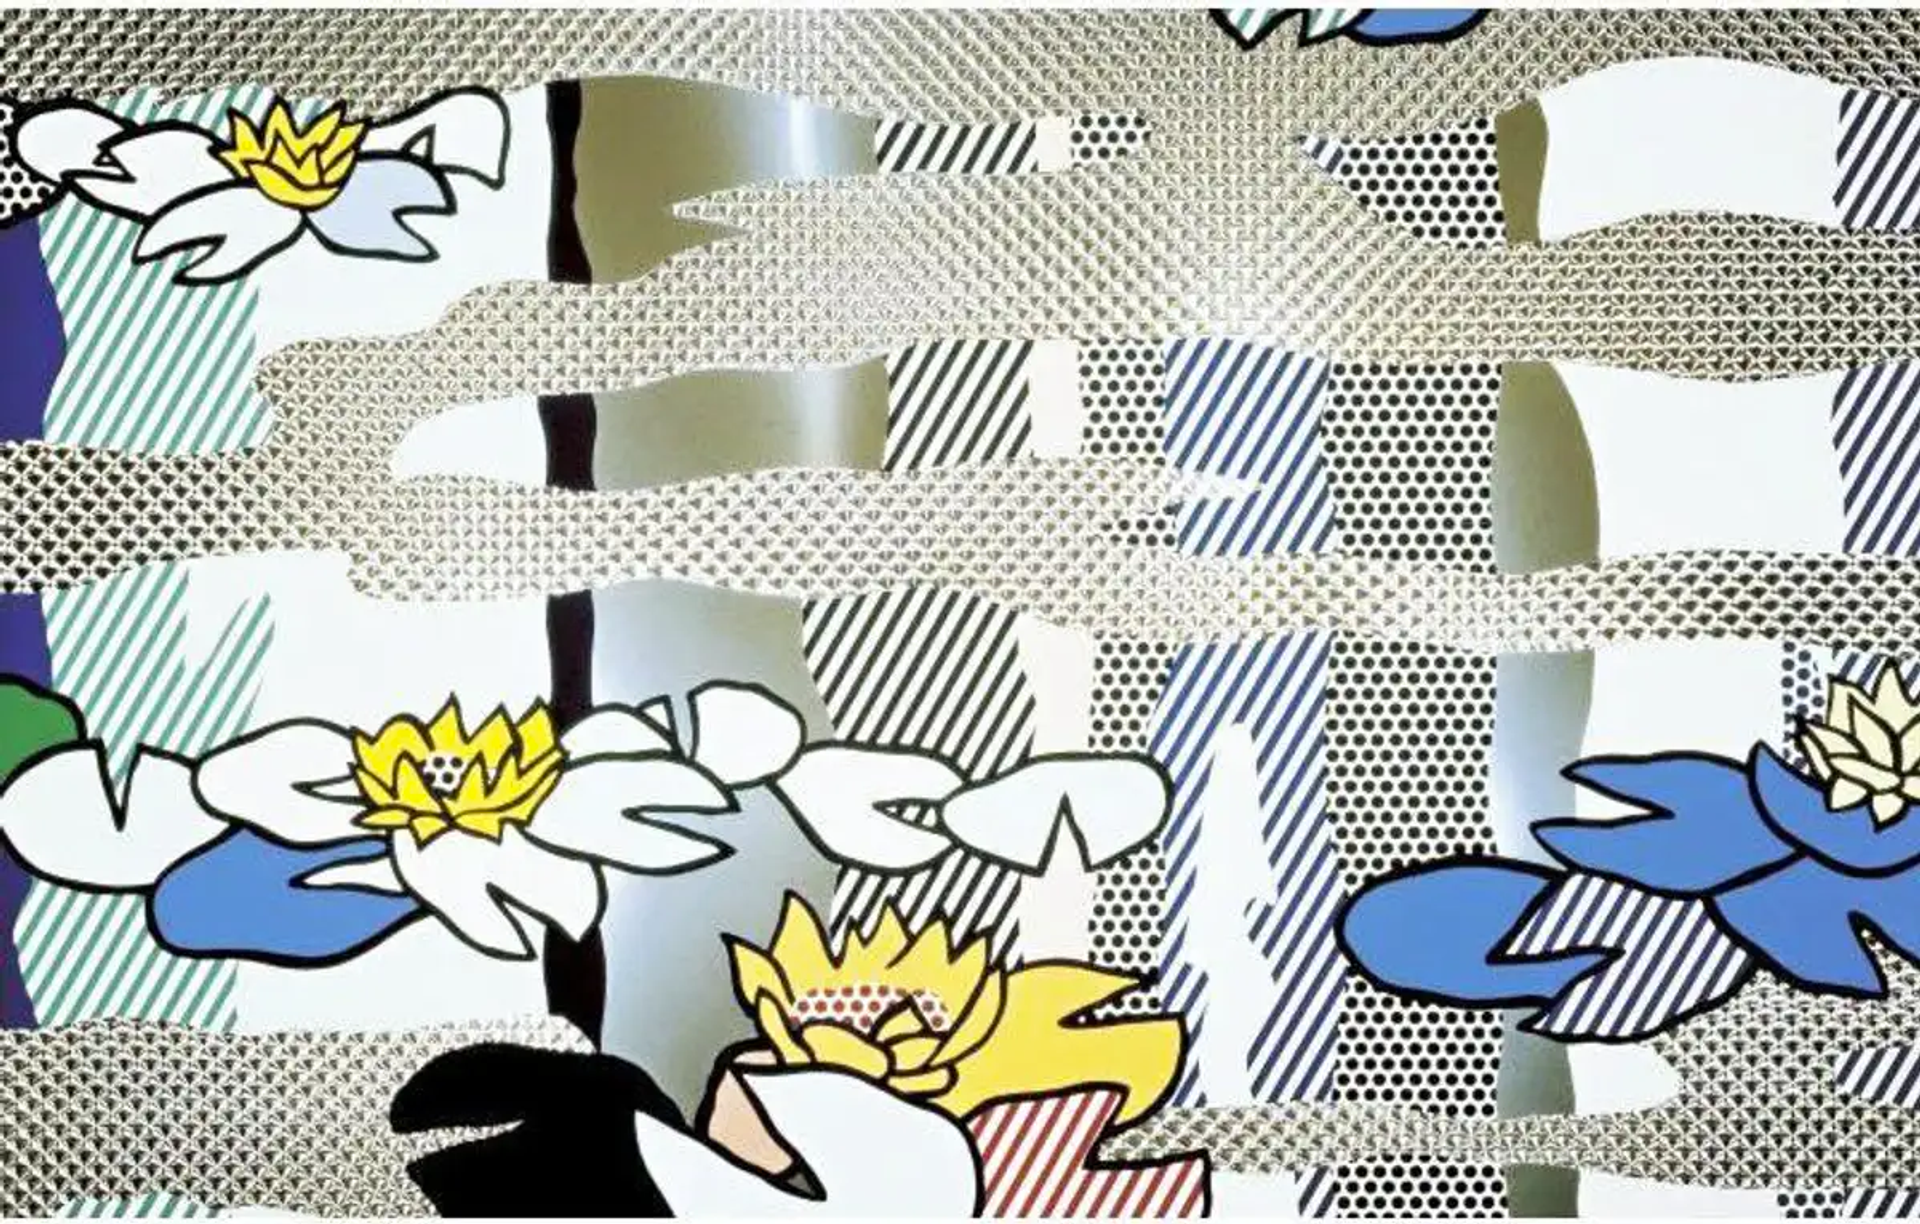 Large swatches of exposed metal are interspersed with Water Lilies by Roy Lichtenstein.